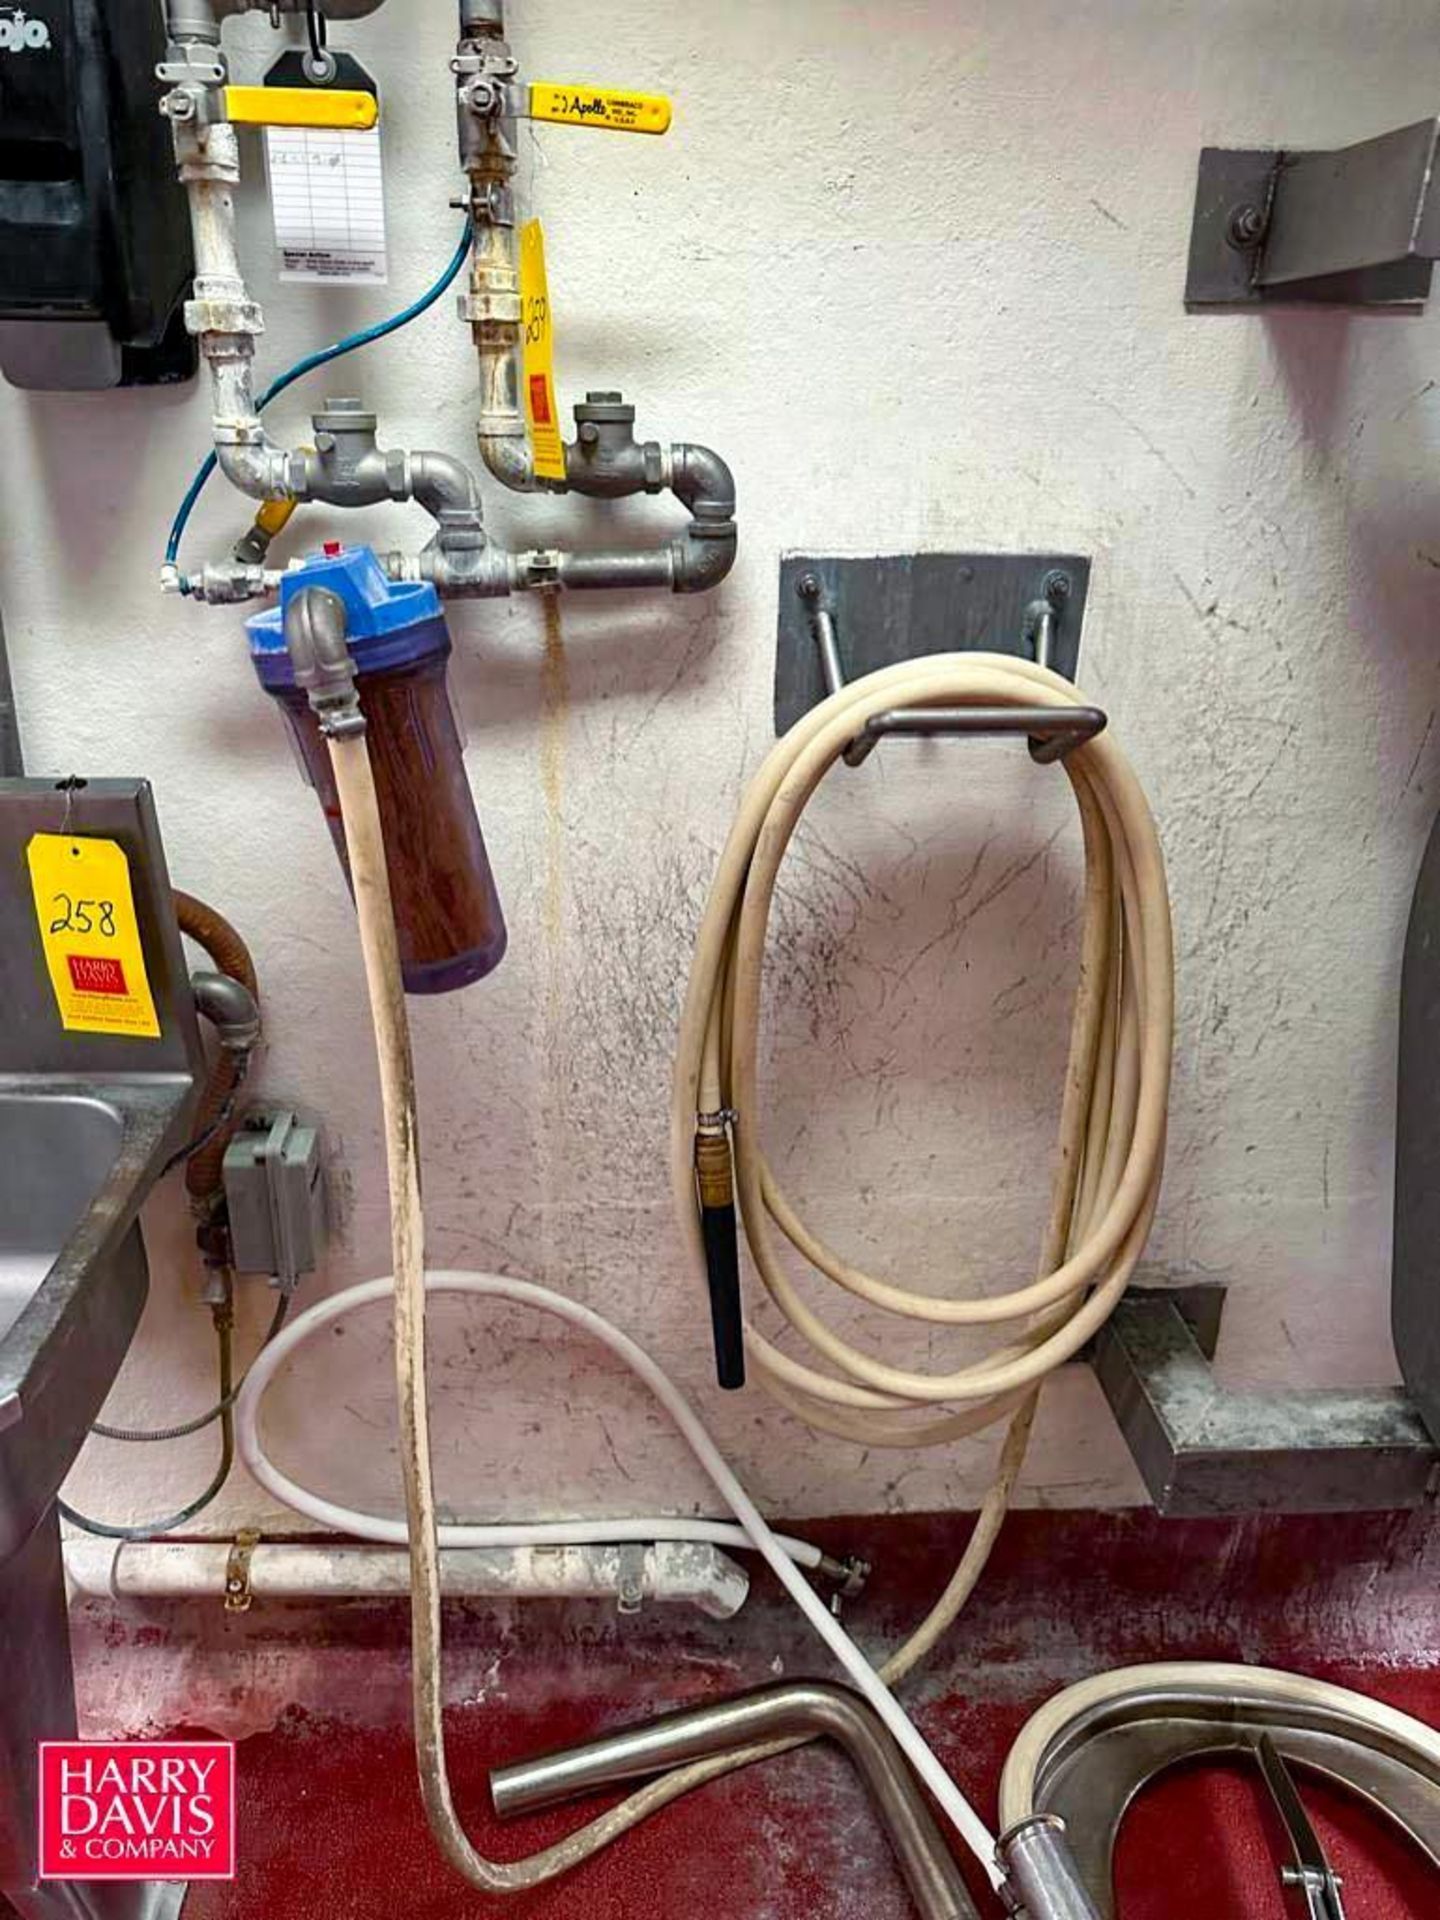 Hot Water Station with Hose, Nozzle, Filter and Ball Valves - Rigging Fee: $100